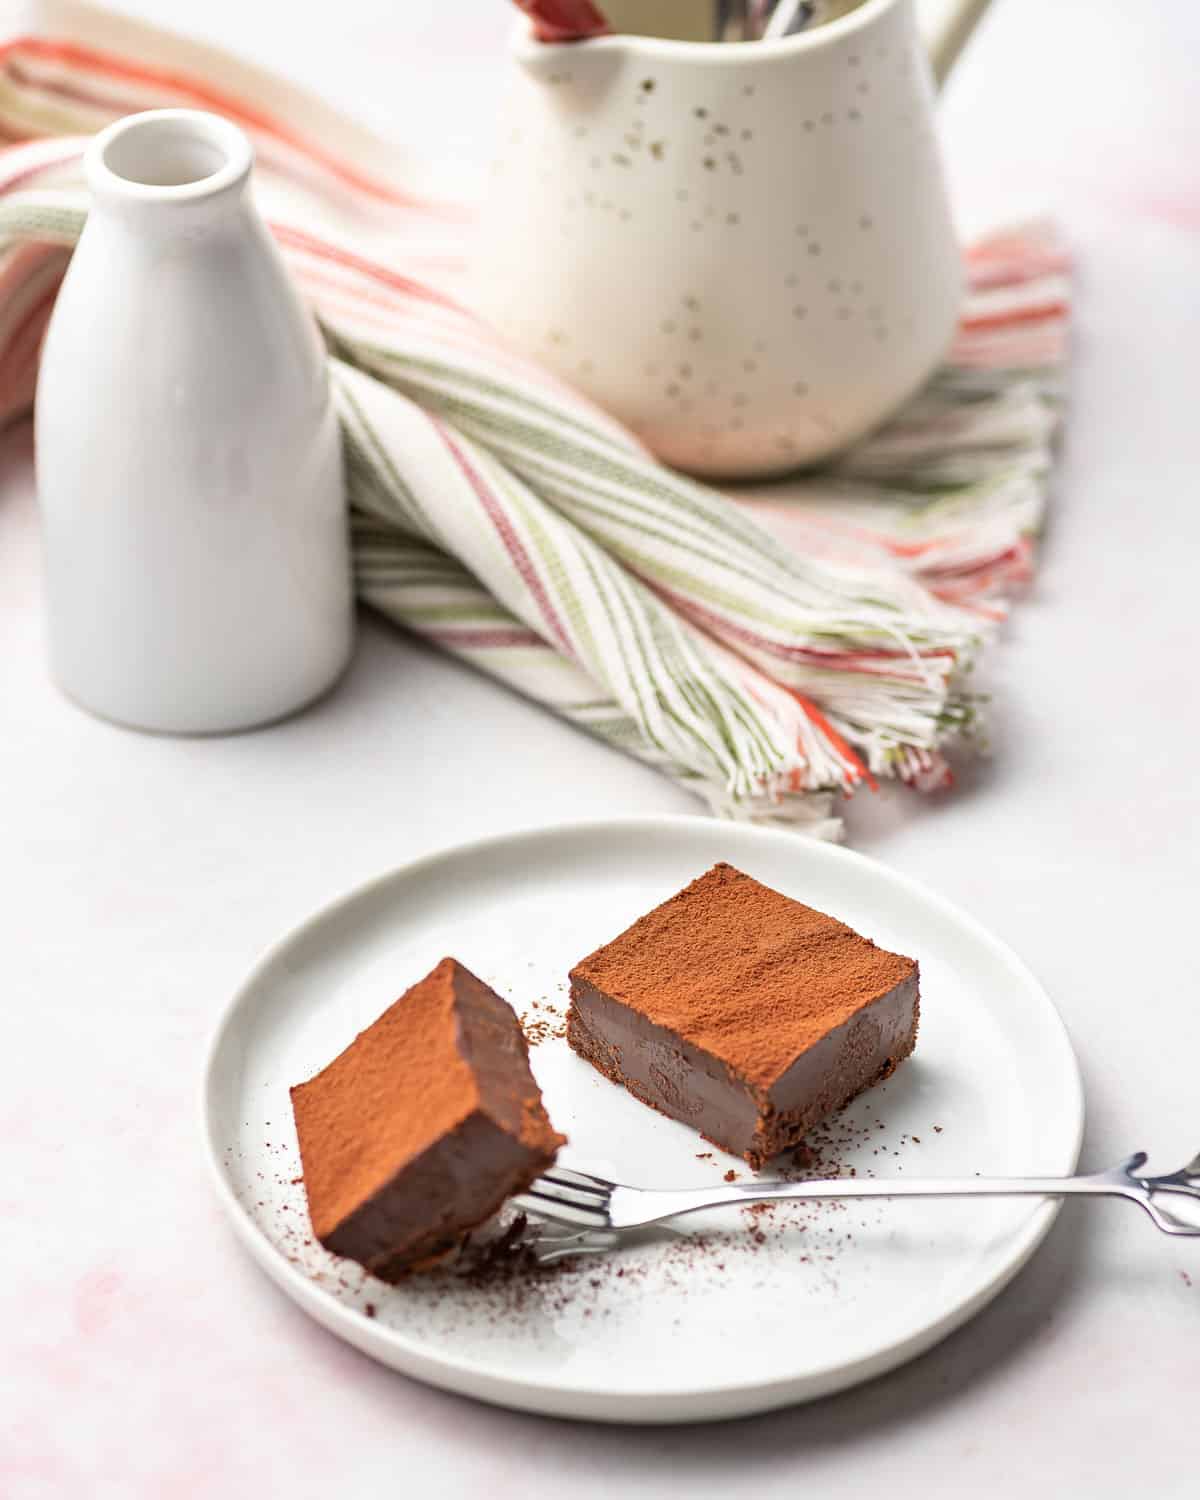 A plate with two pieces of nama chocolate.